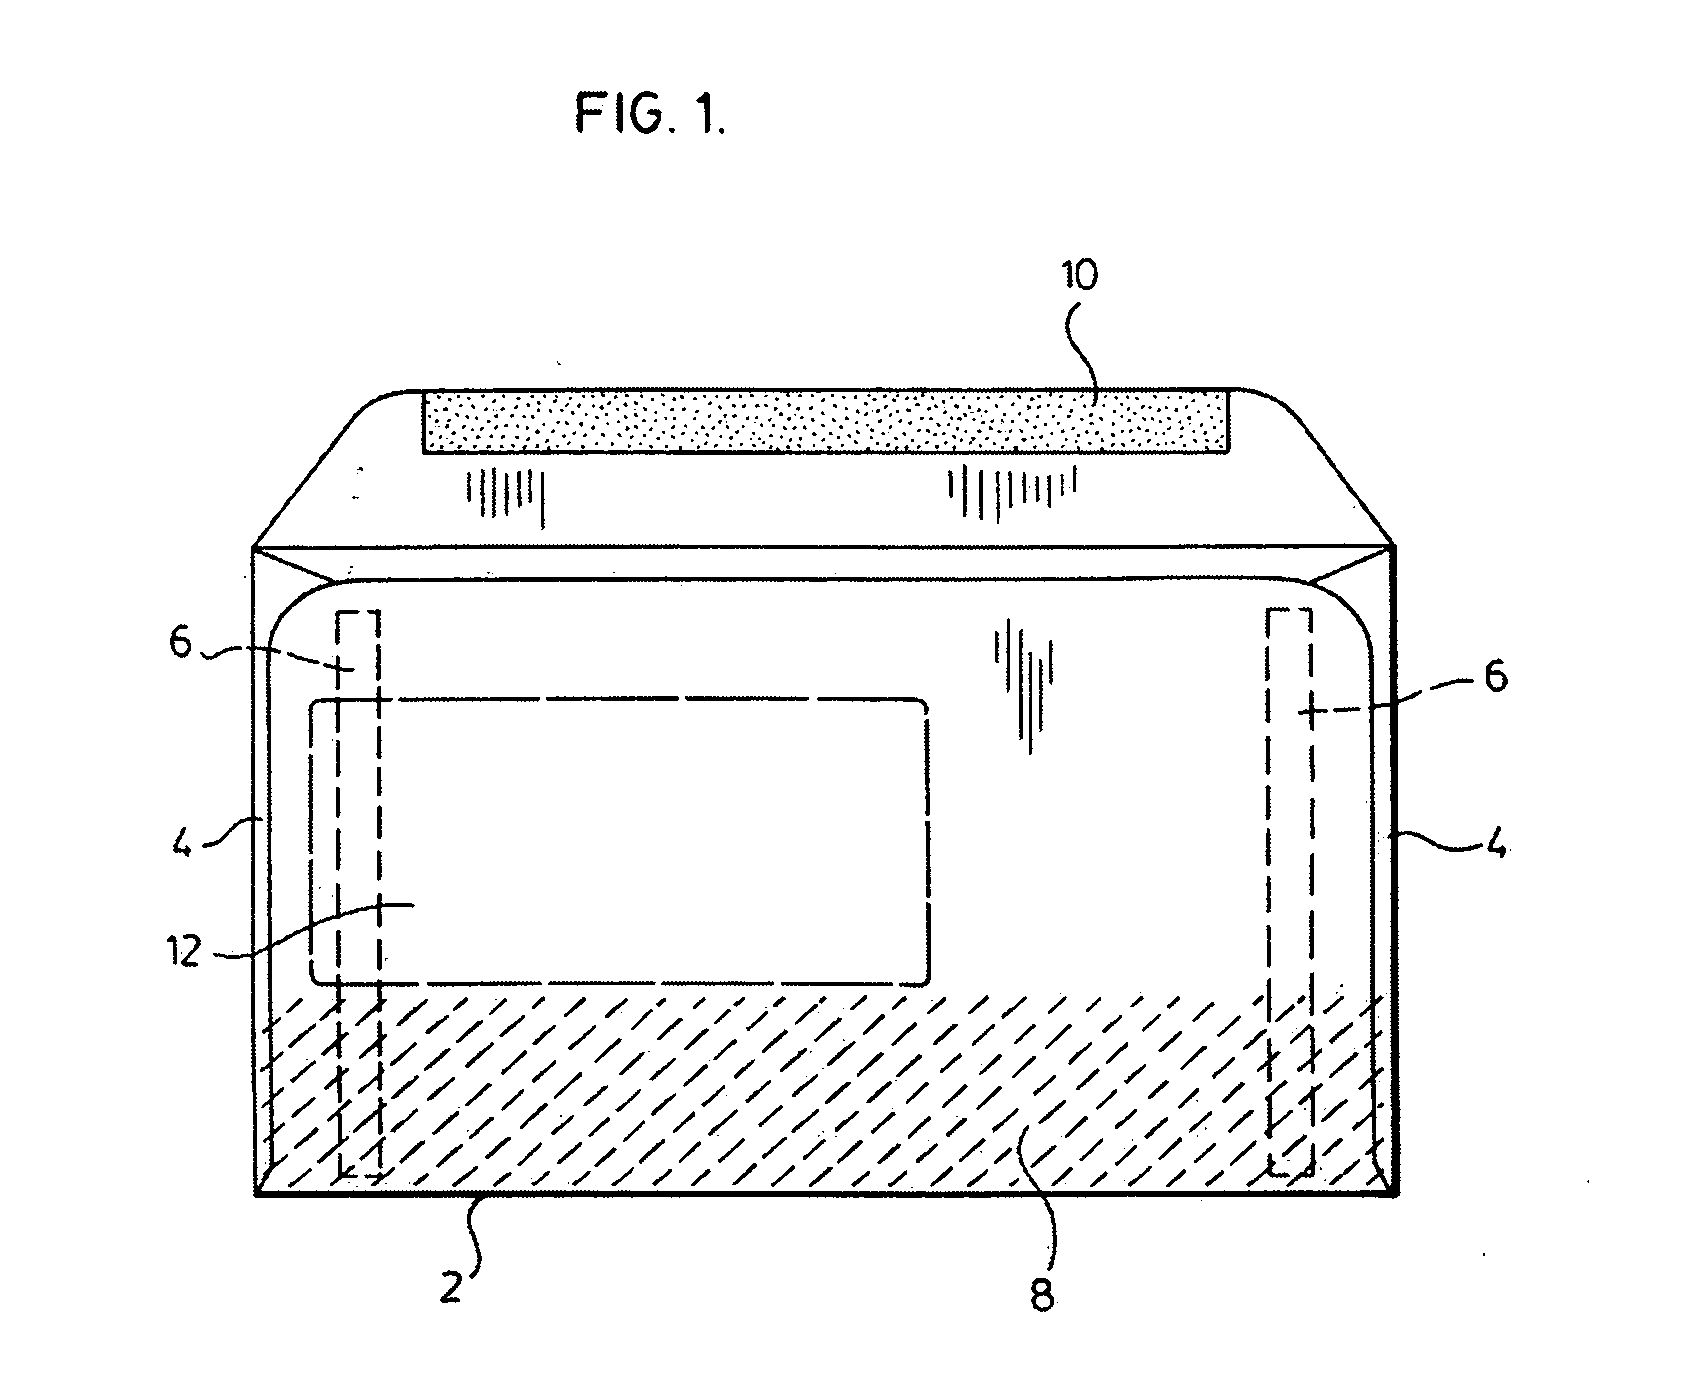 Envelope for mailing of cards containing an embedded chip